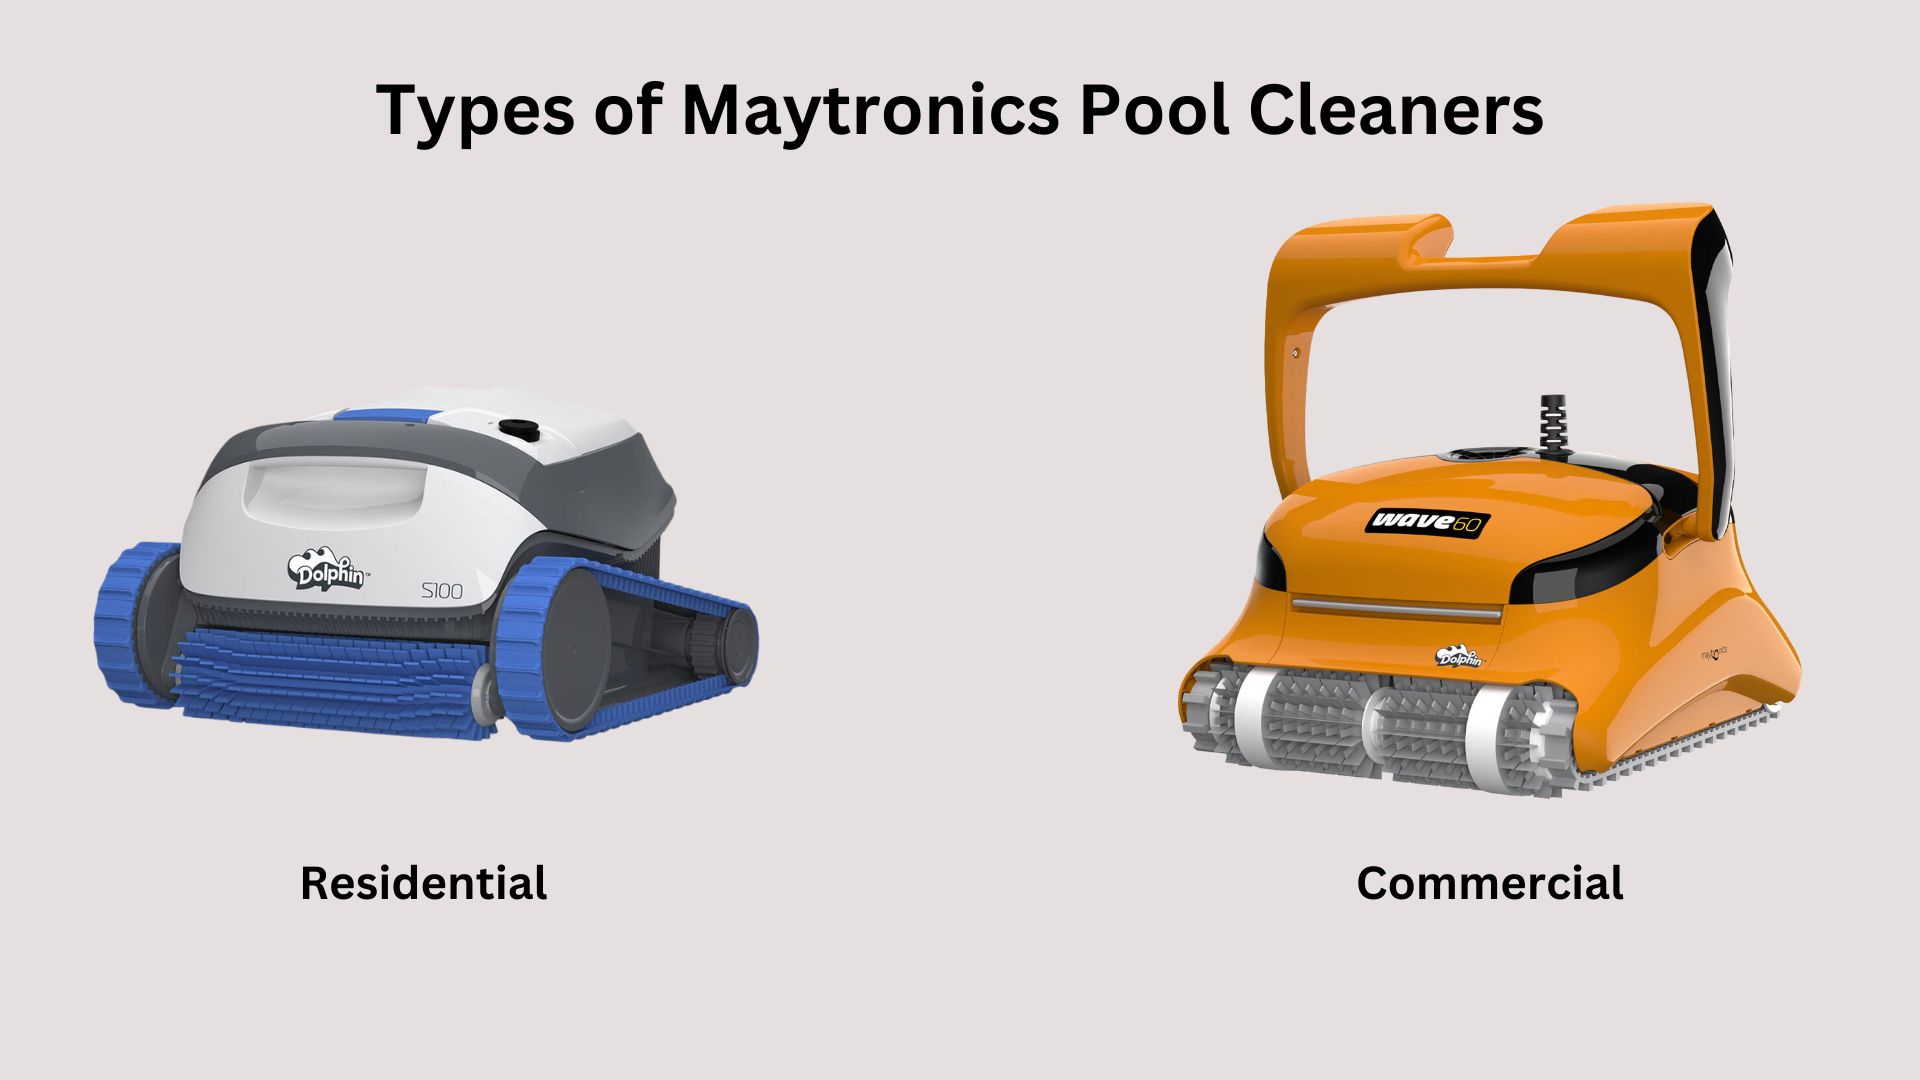 Types of Maytronics Pool Cleaners